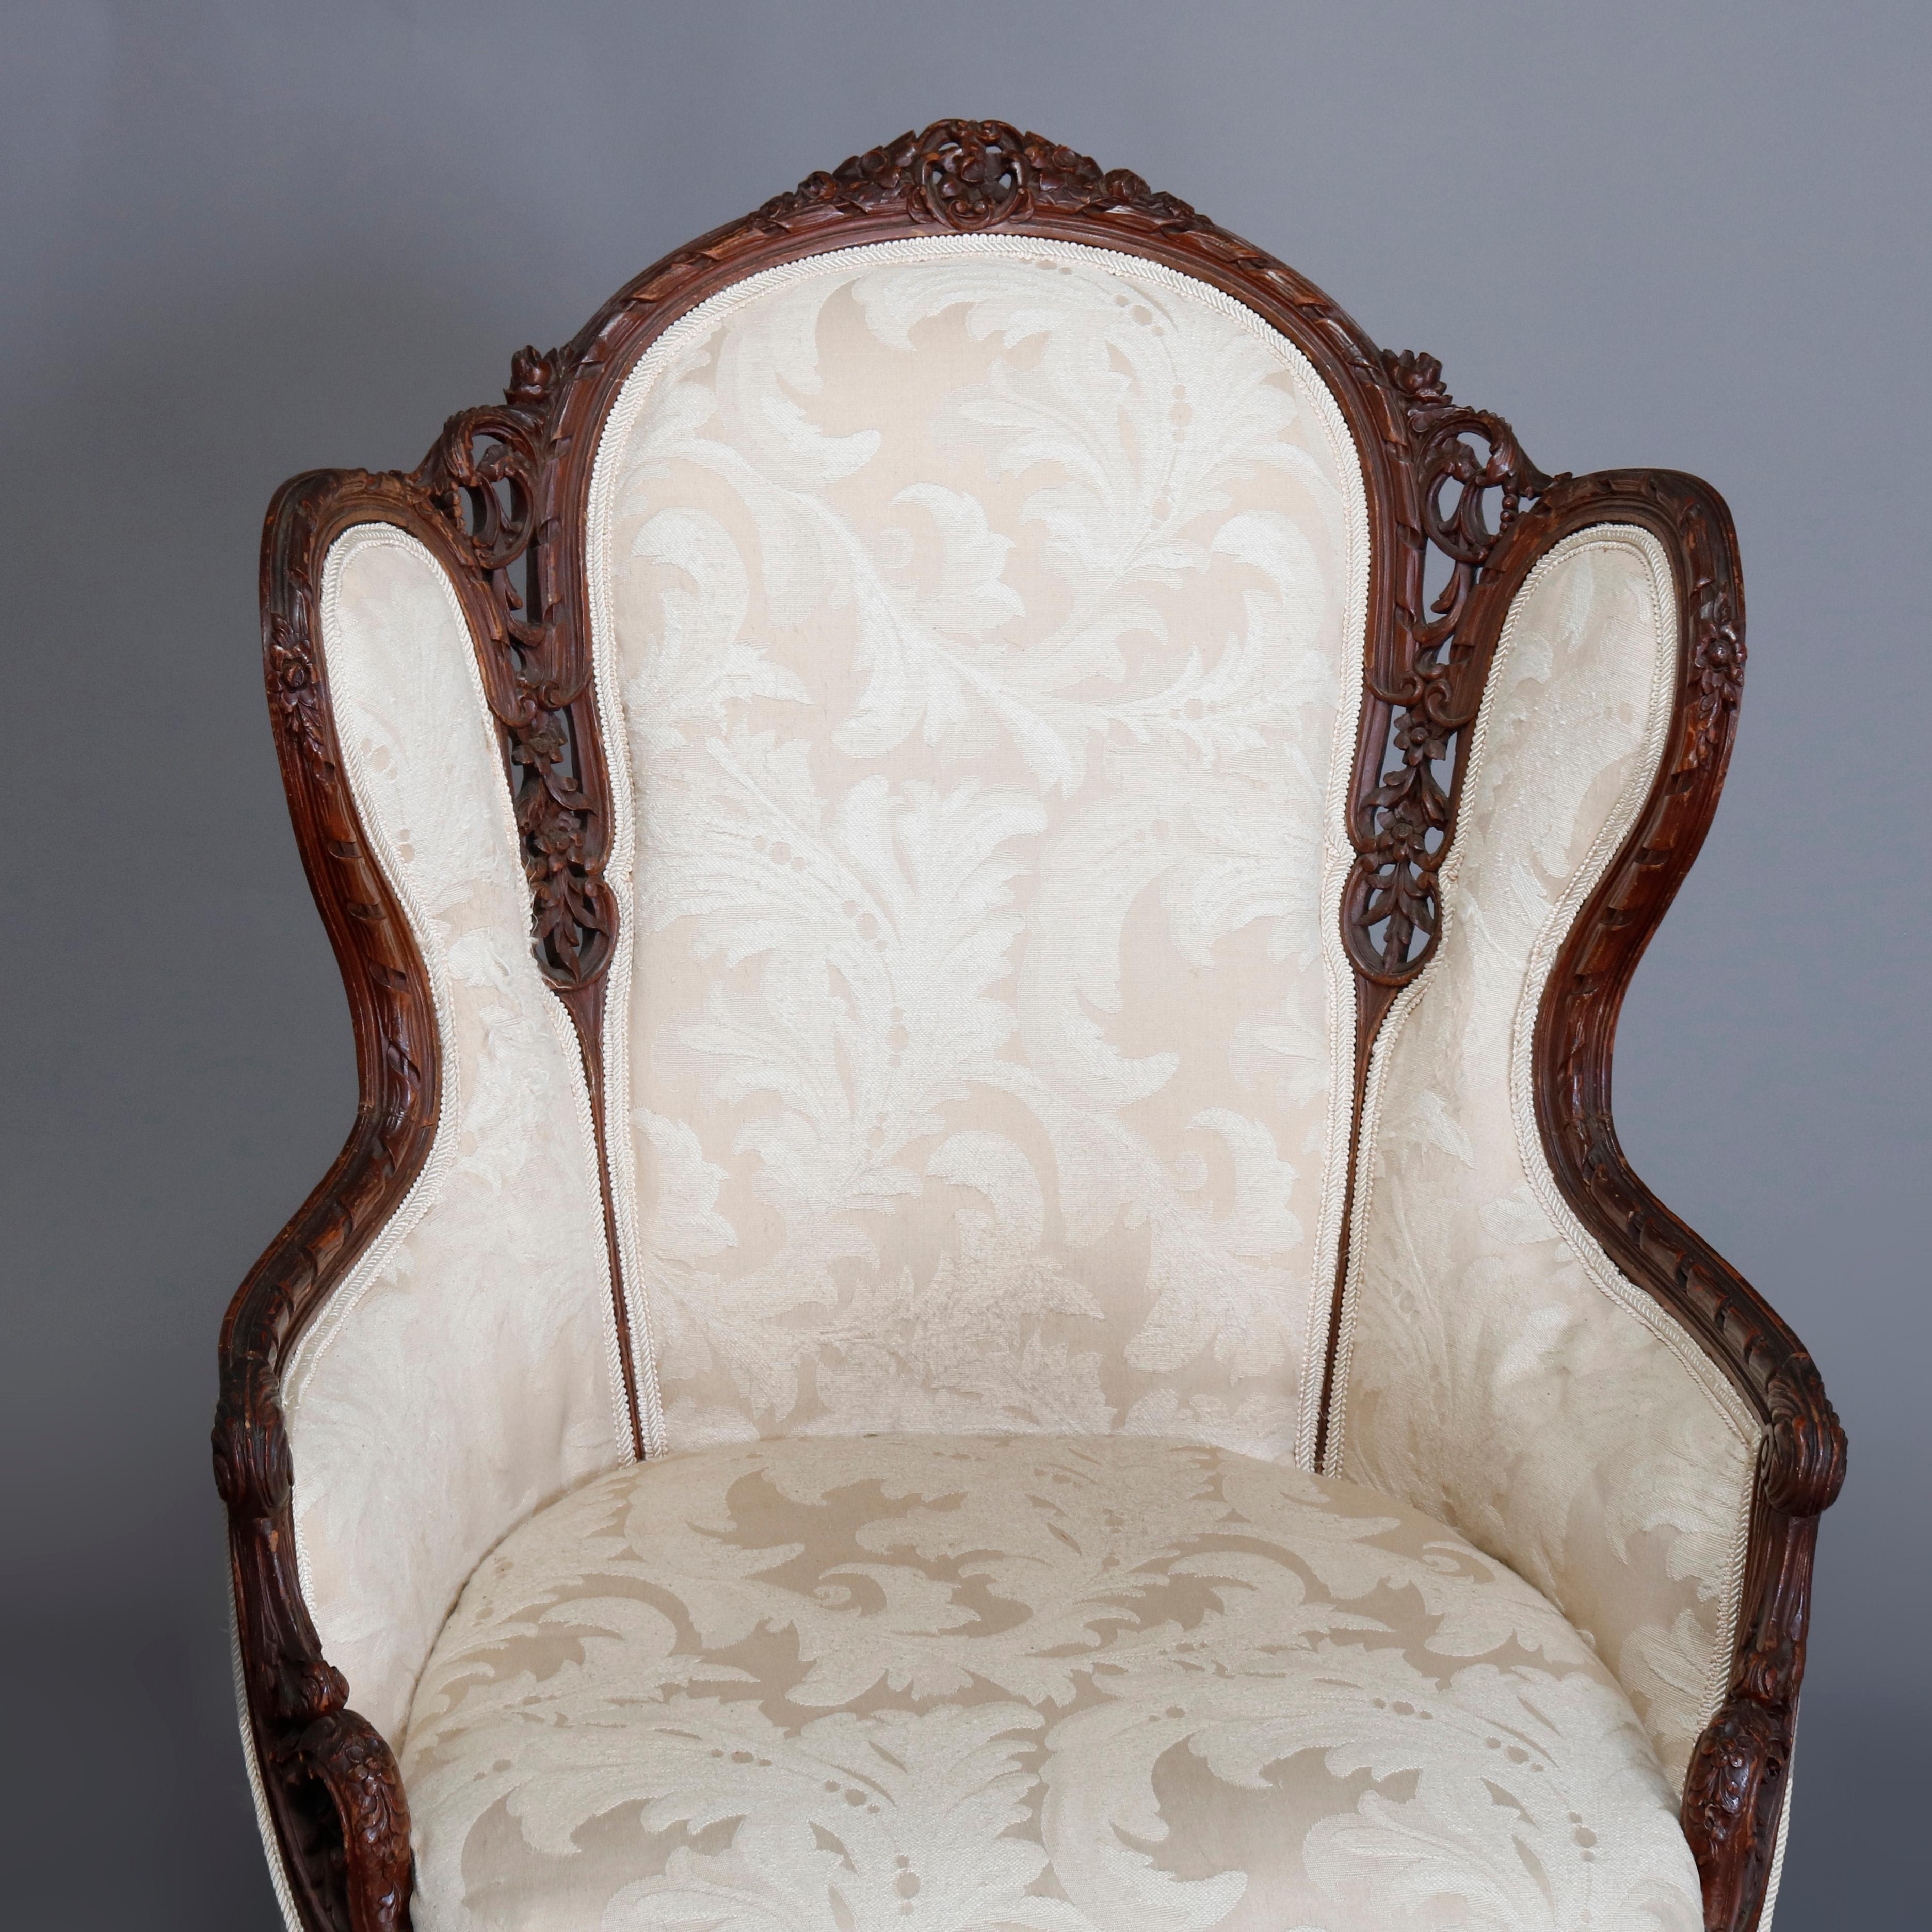 A French style fireside wing back chair offers carved and pierced foliate and scroll form frame with ?floral crest, upholstered seat and back and raised on cabriole legs, 20th century

***DELIVERY NOTICE – Due to COVID-19 we are employing NO-CONTACT